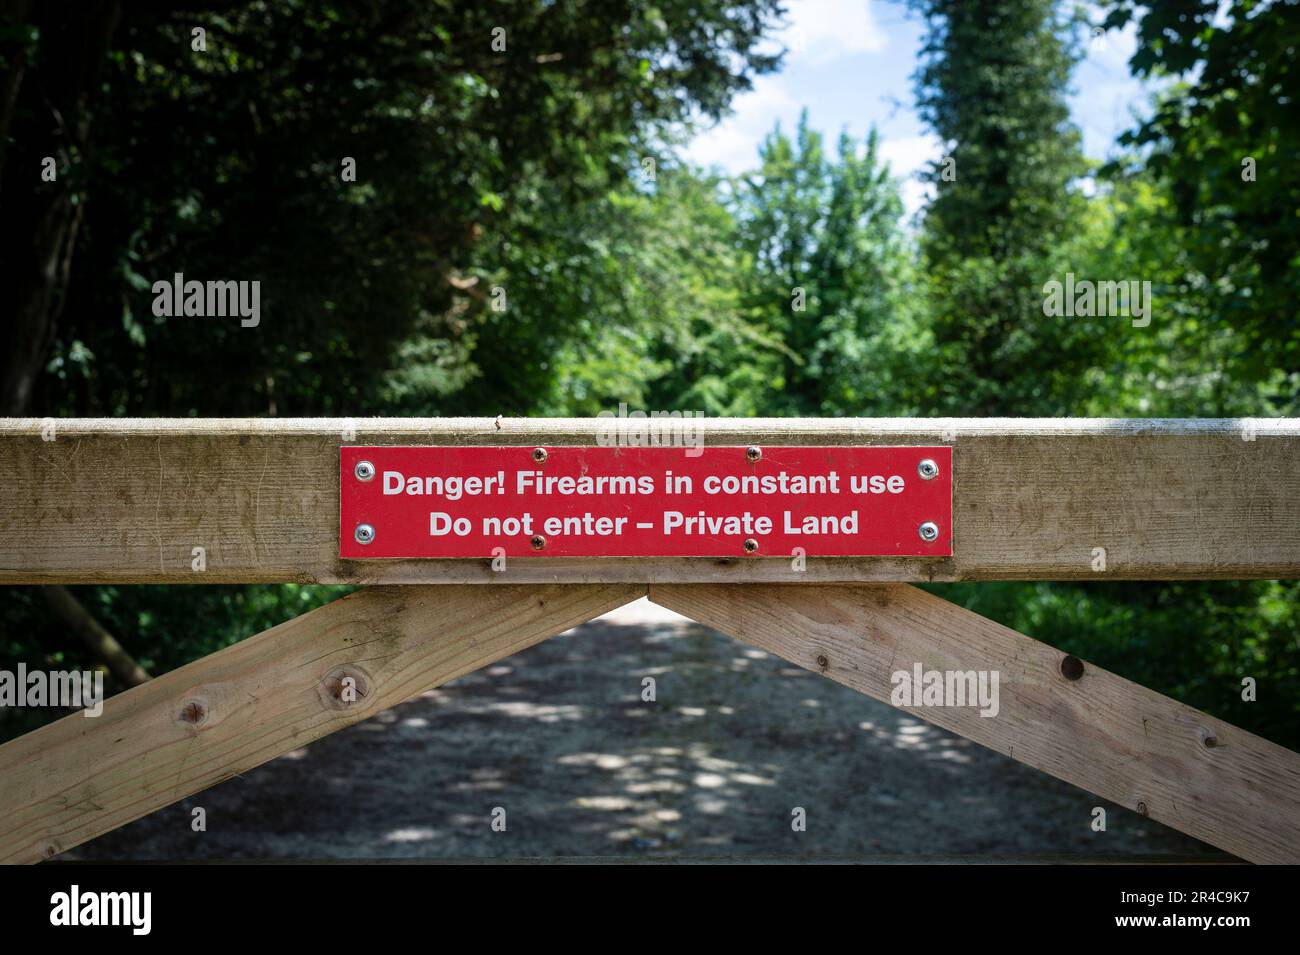 Red warning sign on a gate 'Danger! Firearms in constant use. Do not enter - Private Land'. Stock Photo